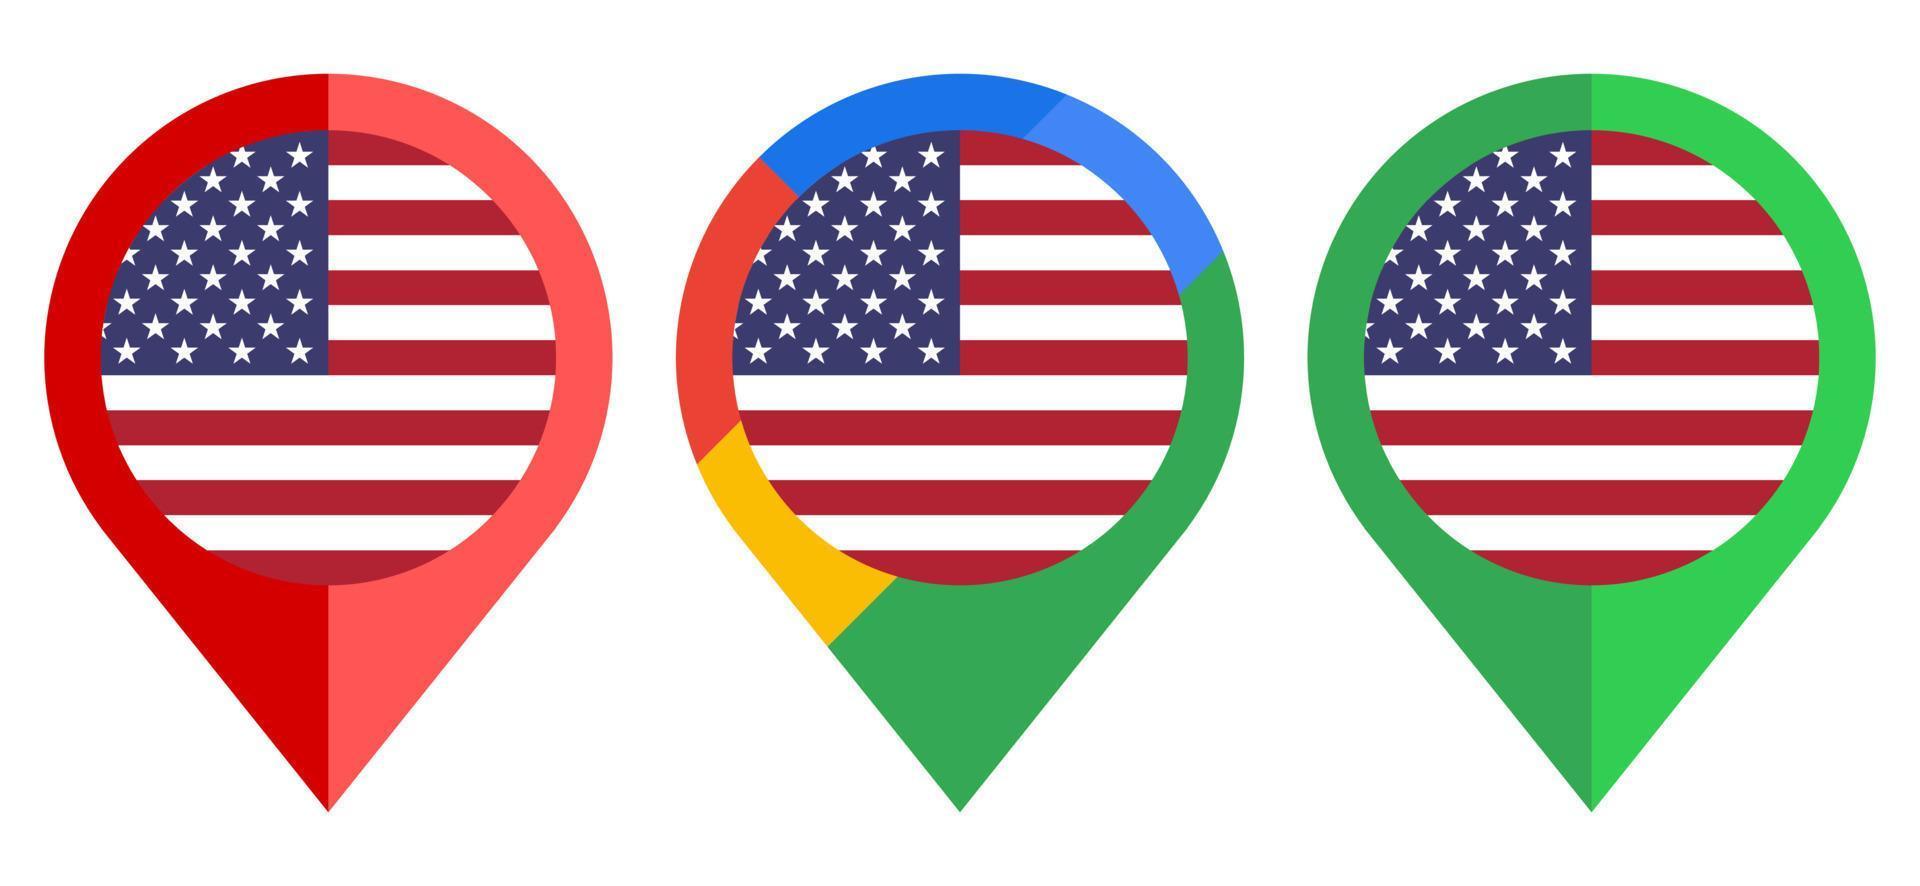 flat map marker icon with usa flag isolated on white background vector